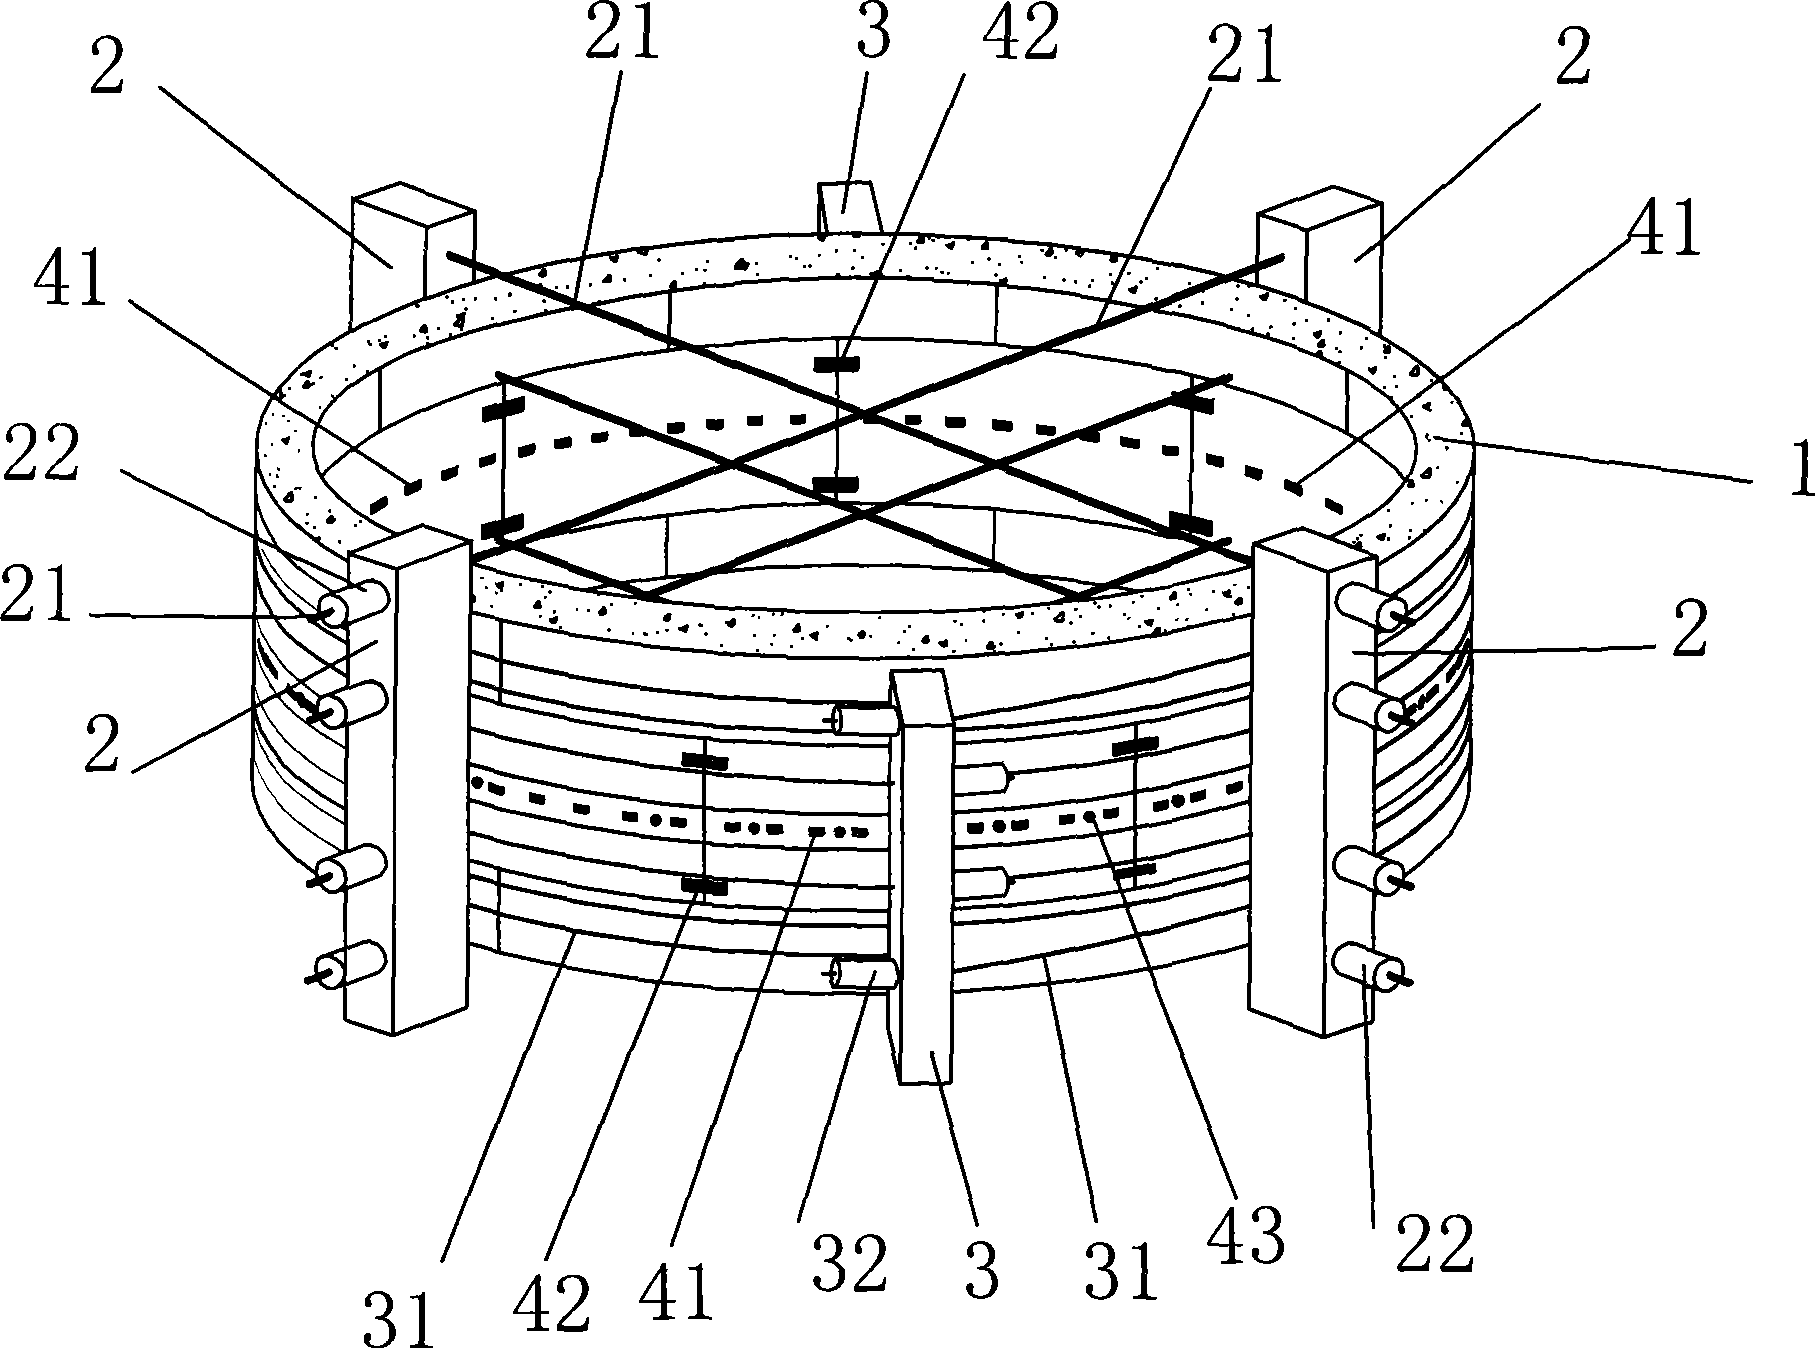 Hydraulic pressure and soil pressure independently loaded shield tunneling structure prototype experiment apparatus